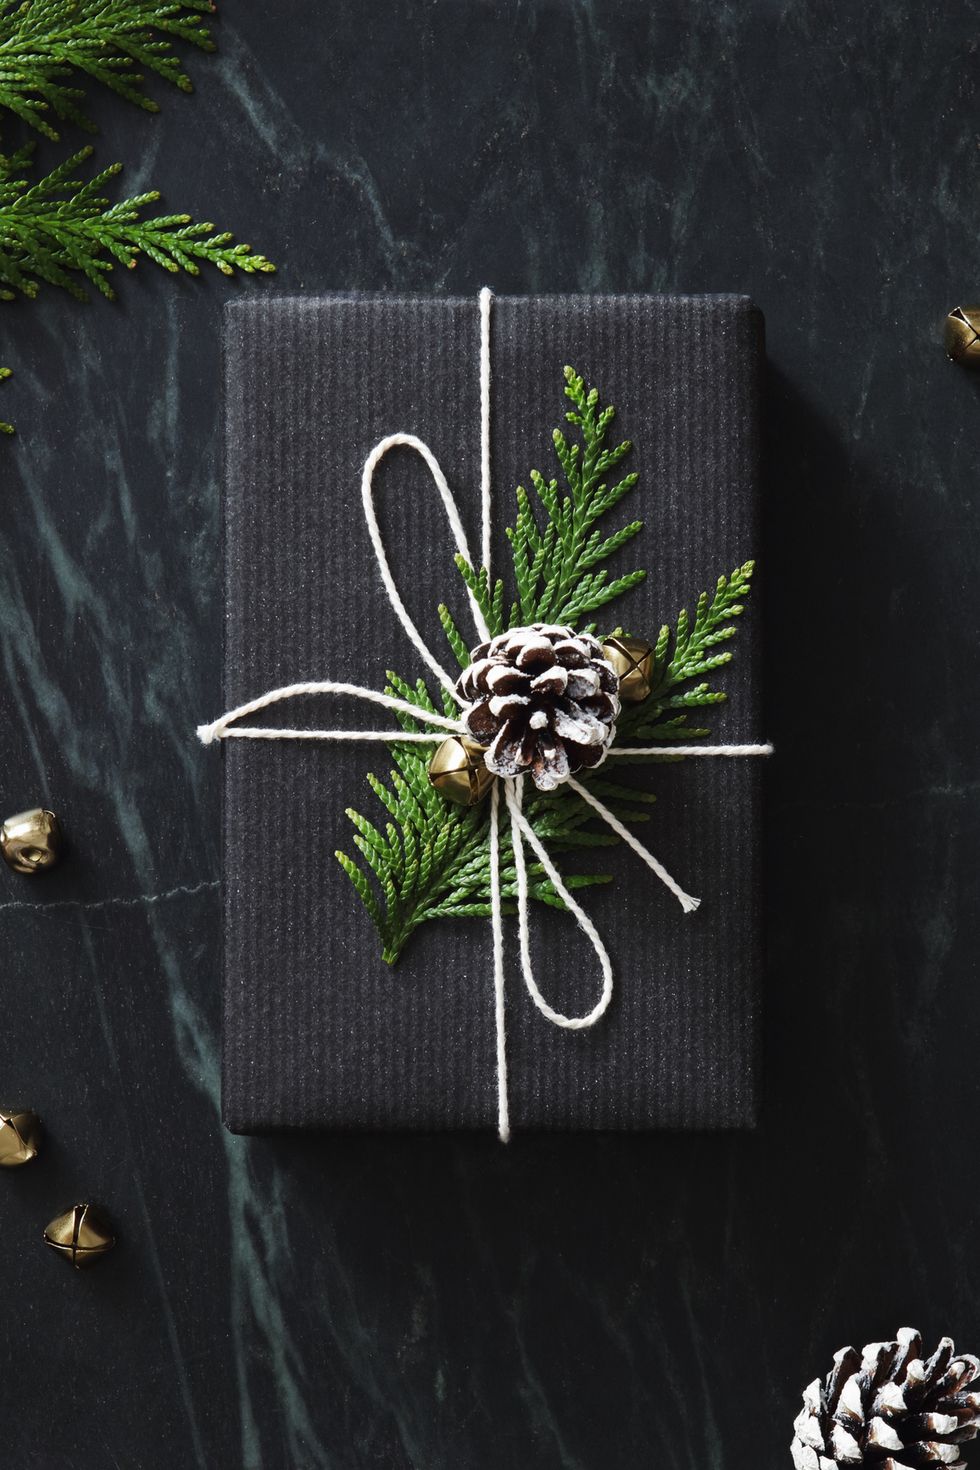 50 Best Gift Wrapping Ideas for Every Occasion